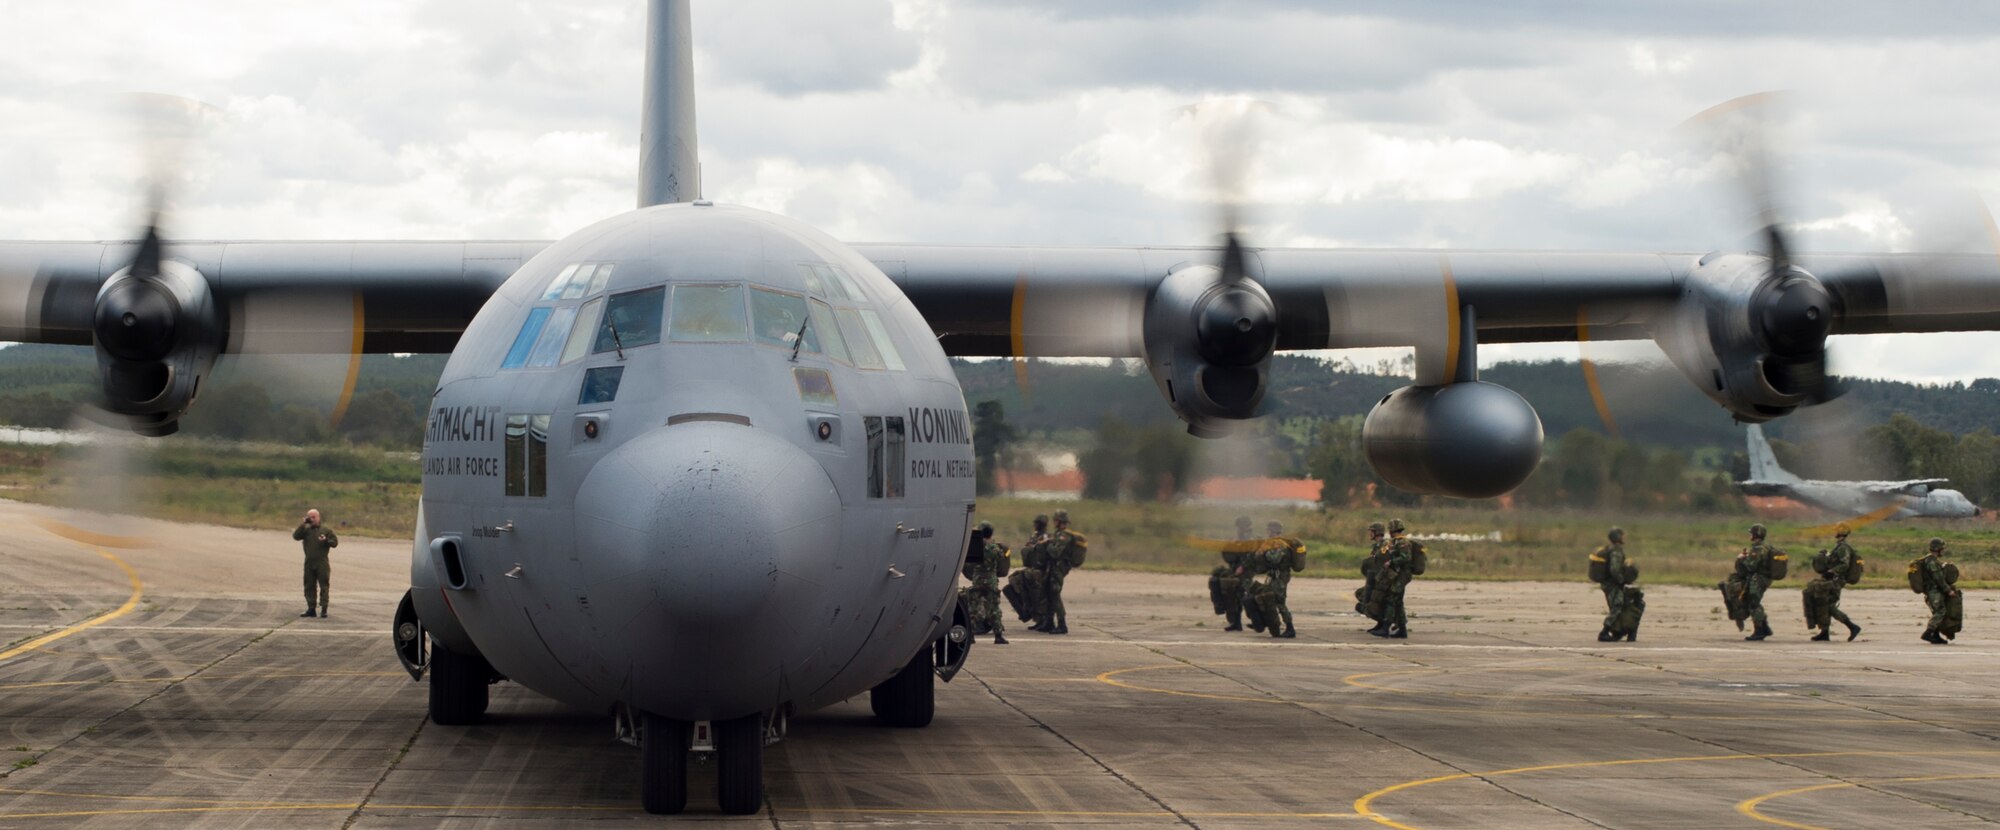 Portuguese paratroopers load onto a Royal Netherlands air force C-130H Hercules during exercise Real Thaw 16 in Beja, Portugal, Feb. 25, 2016. Royal Netherlands air force worked alongside the U.S. to airdrop more than 100 paratroopers. (U.S. Air Force photo/Senior Airman Jonathan Stefanko)